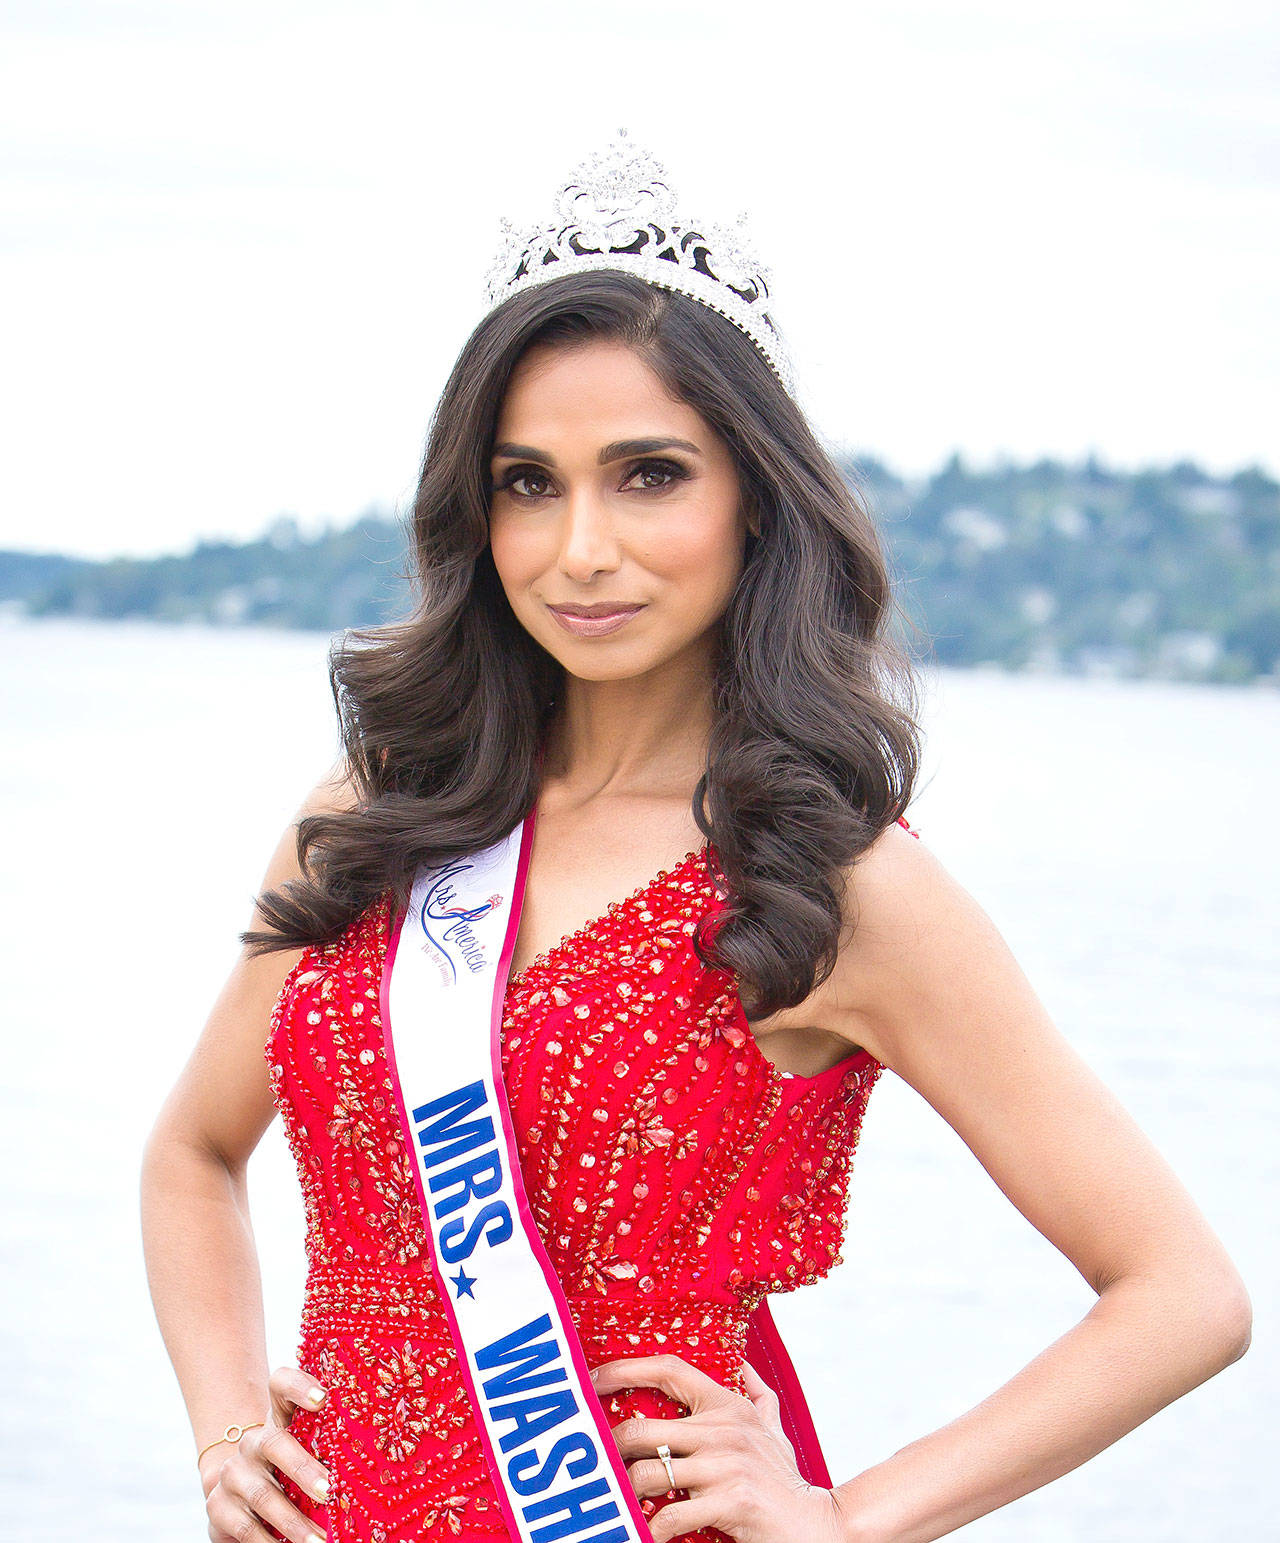 Photo courtesy of Neelam Chahlia                                 Redmond’s Neelam Chahlia crowned as Mrs. Washington America and competing for the national Mrs. America title on Aug. 26.